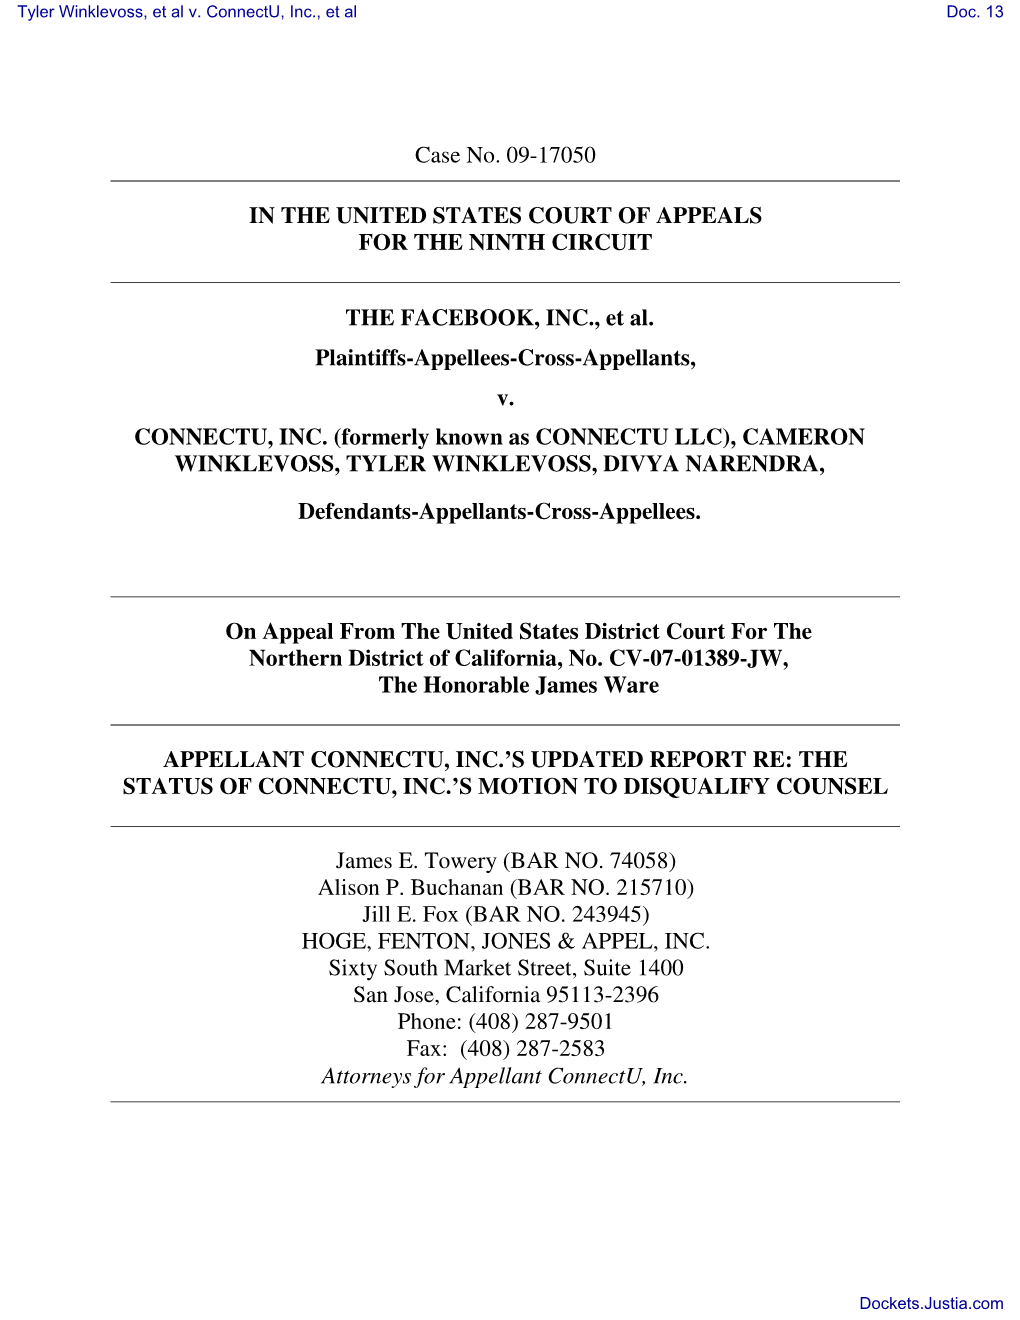 Case No. 09-17050 in the UNITED STATES COURT of APPEALS